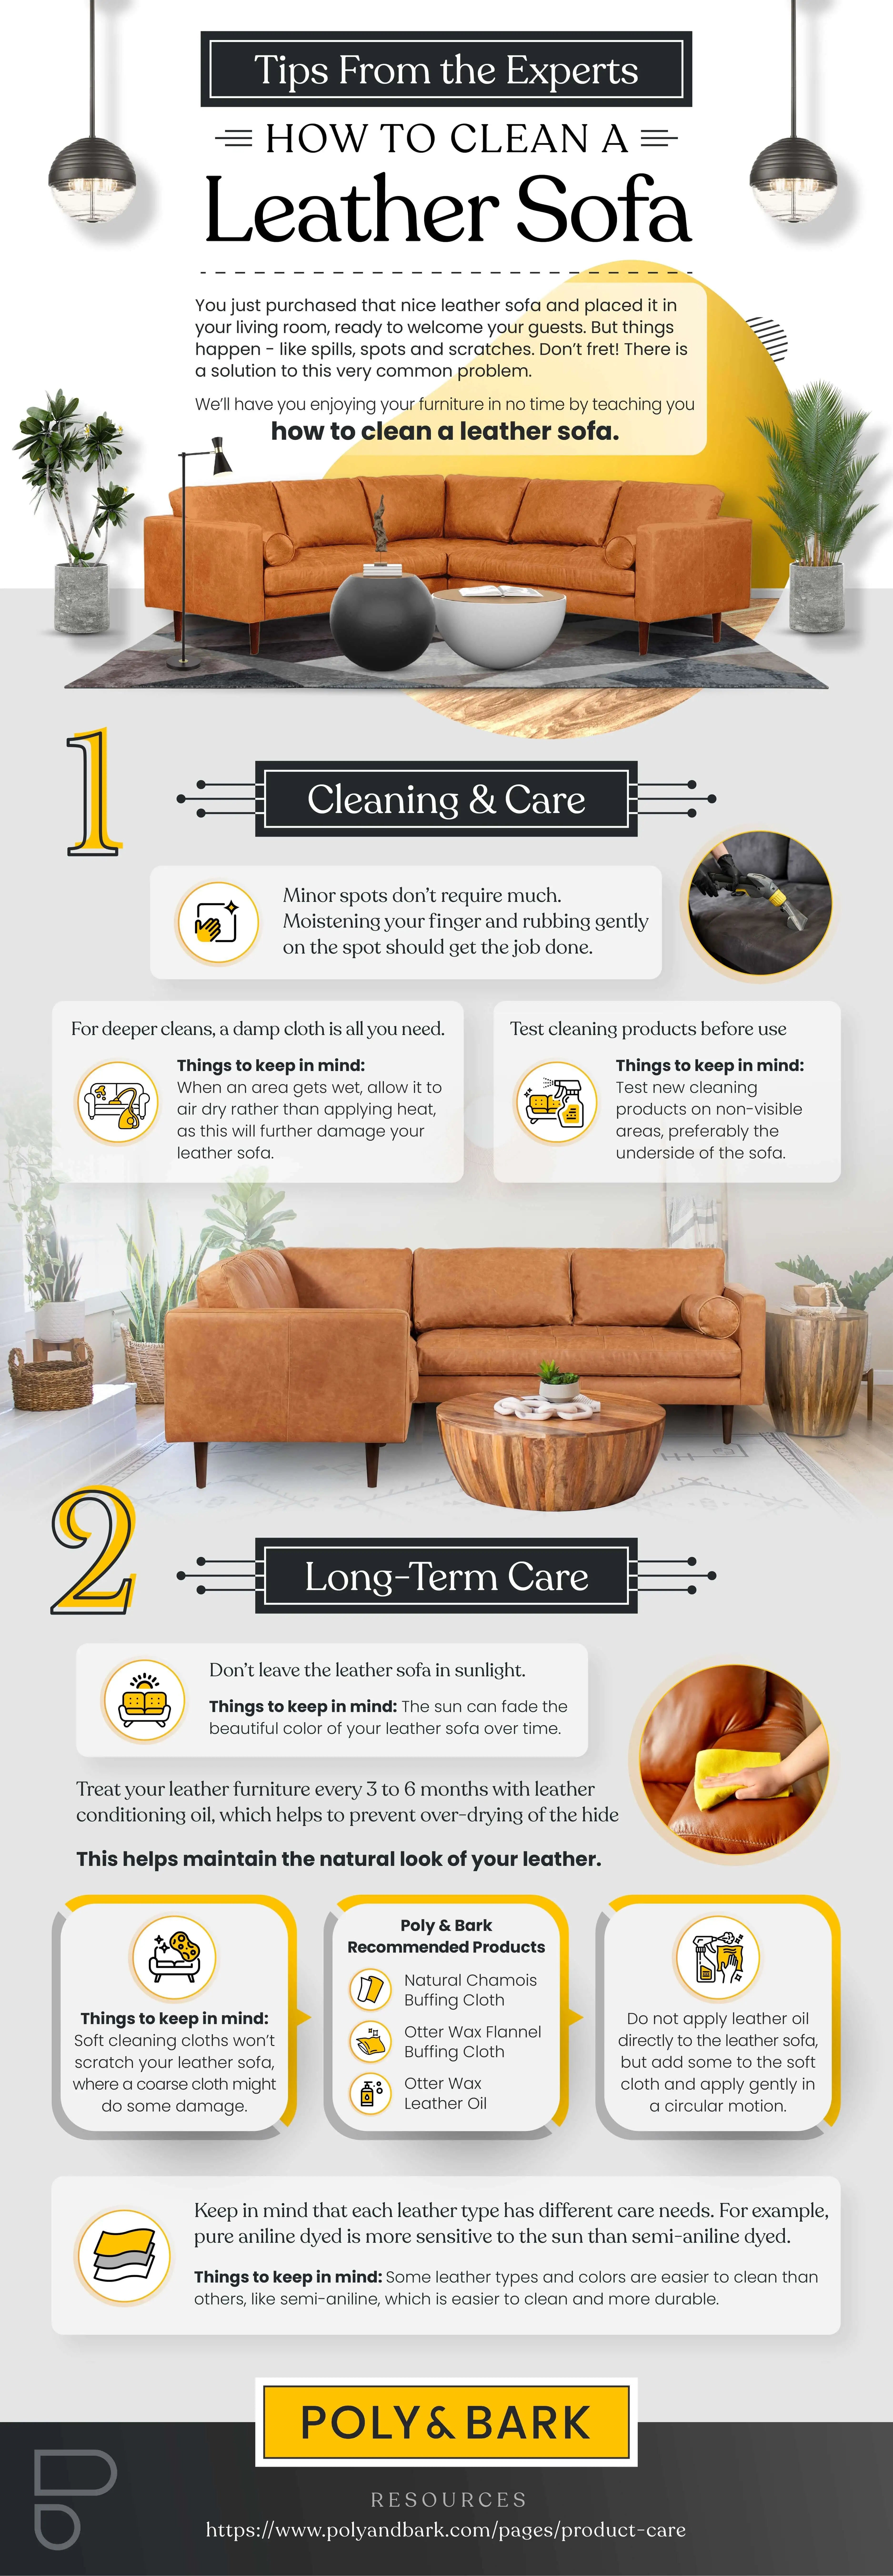 Tips From the Experts: How to Clean a Leather Sofa